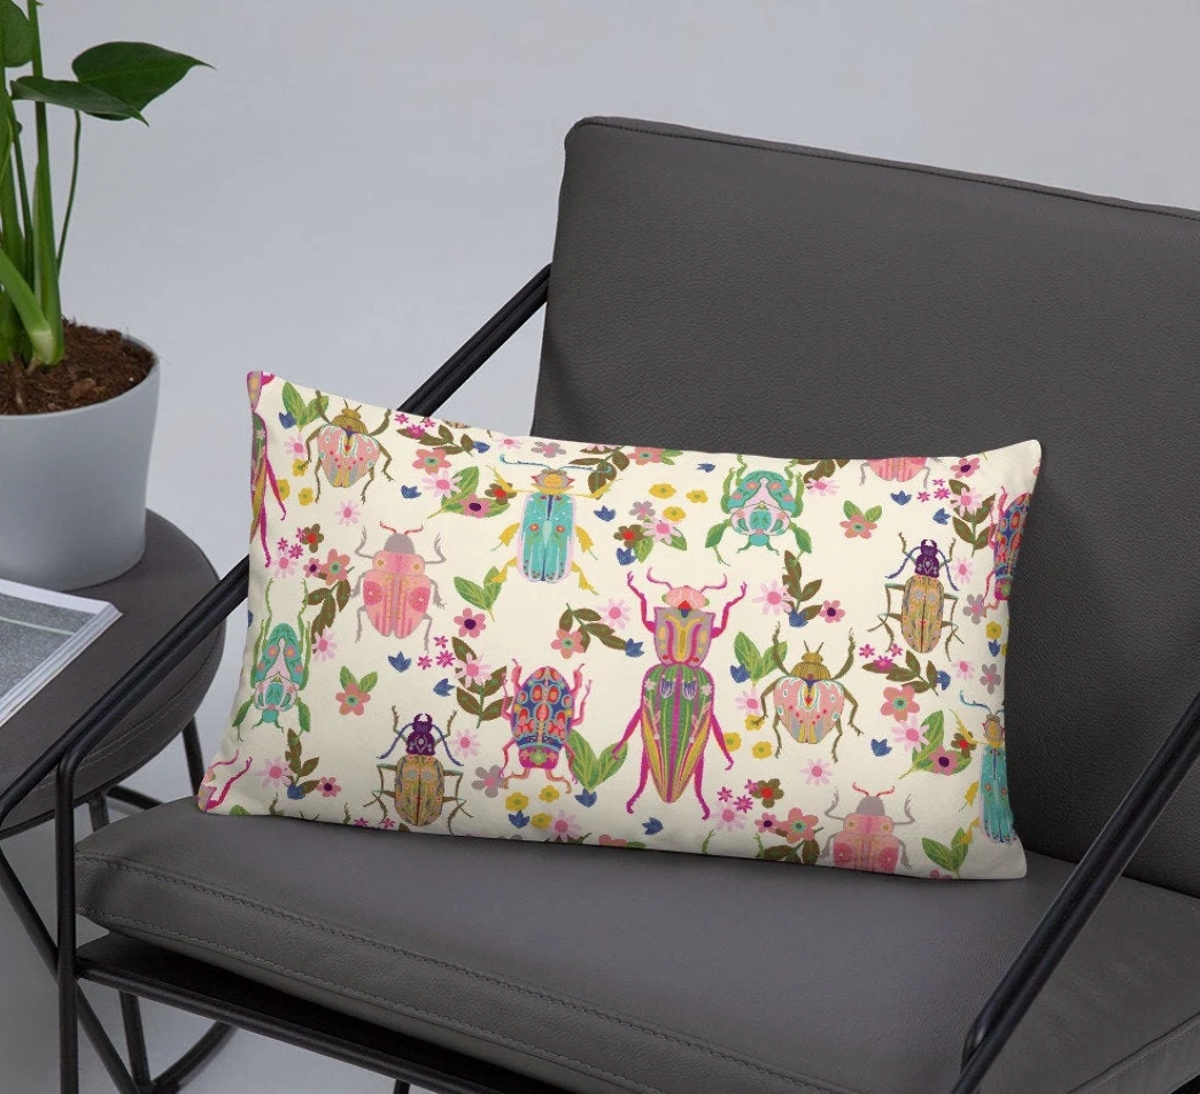 Insect themed chair pillow.